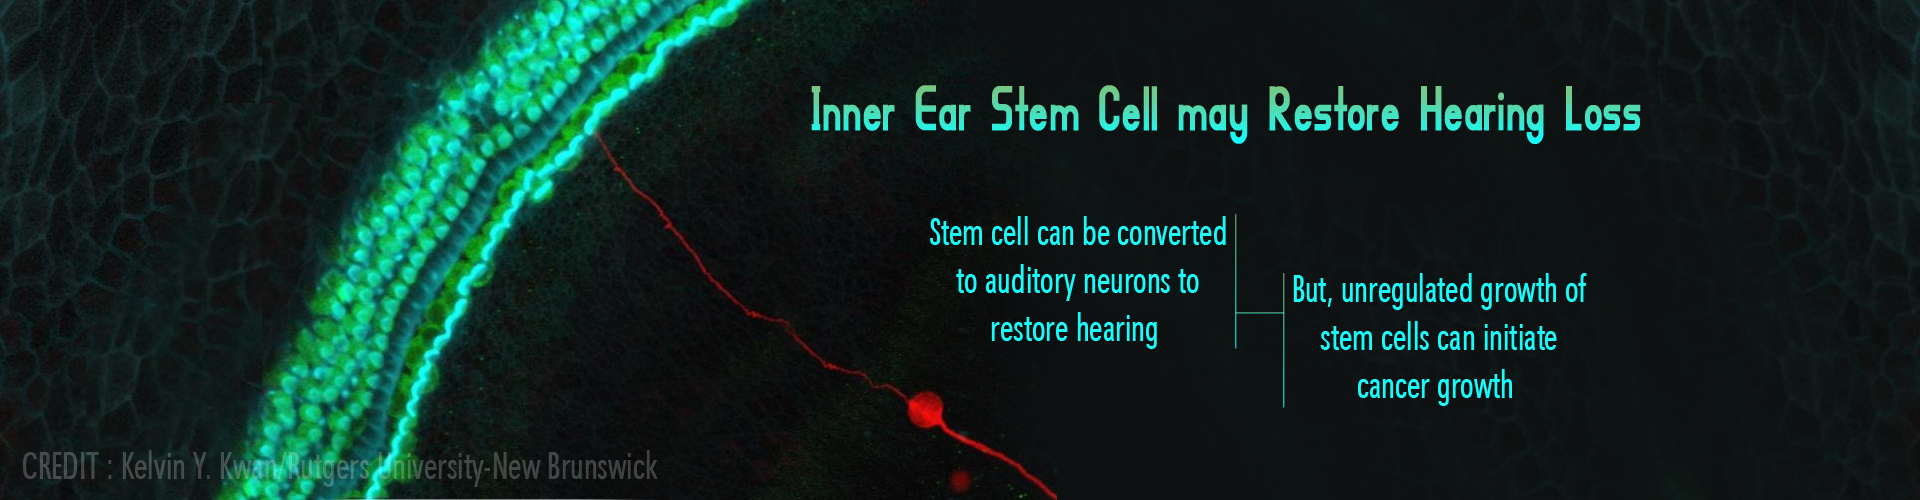 inner ear stem cells may restore hearing loss
- stem cells can be converted to auditory neurons to restore hearing
- unregulated growth of stem cells can initiate cancer growth